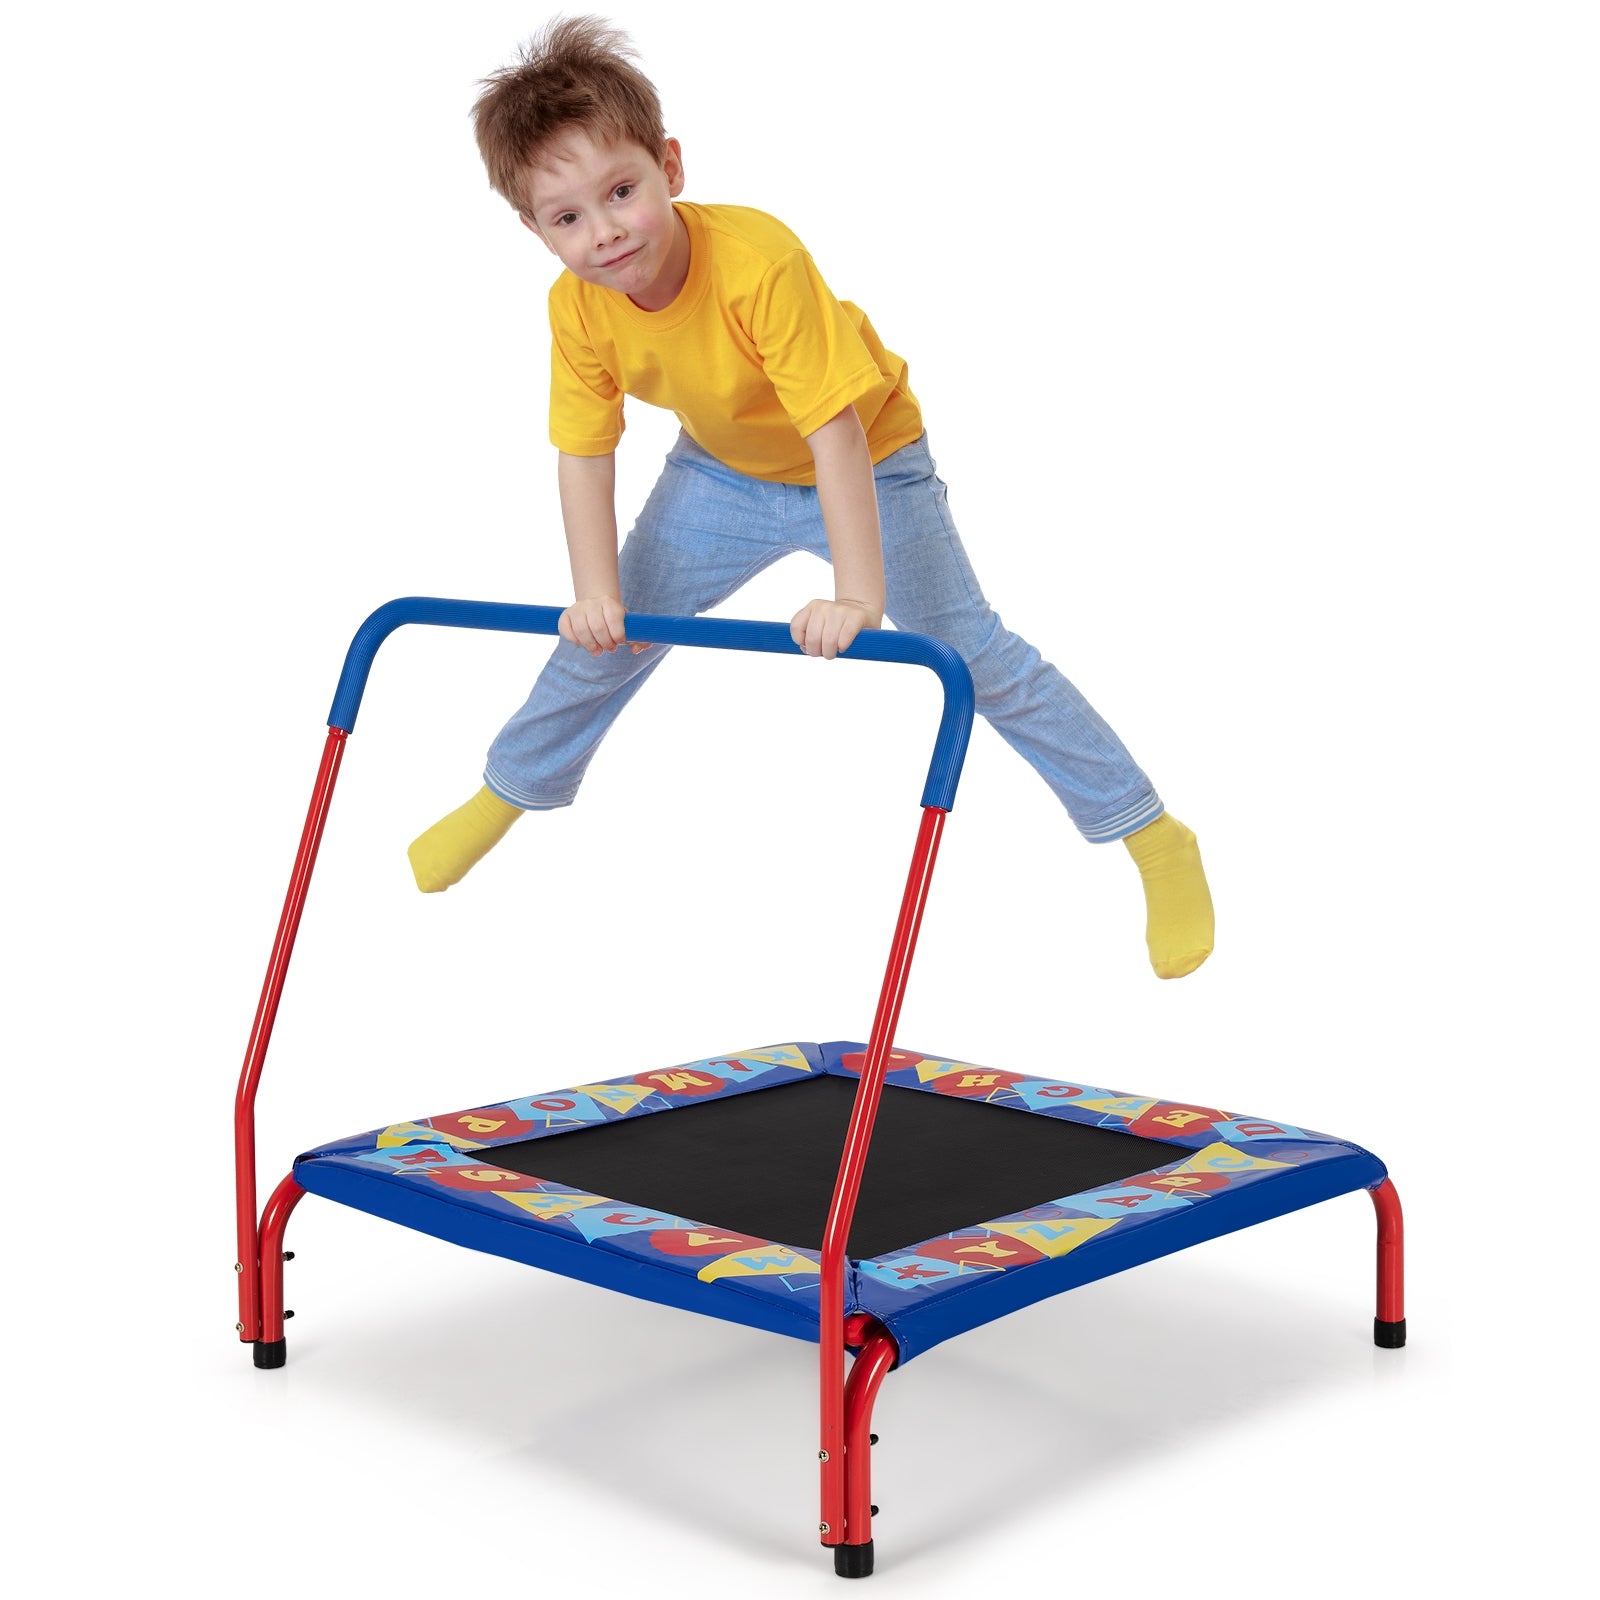 36 Inch Kids Indoor Outdoor Square Trampoline with Foamed Handrail